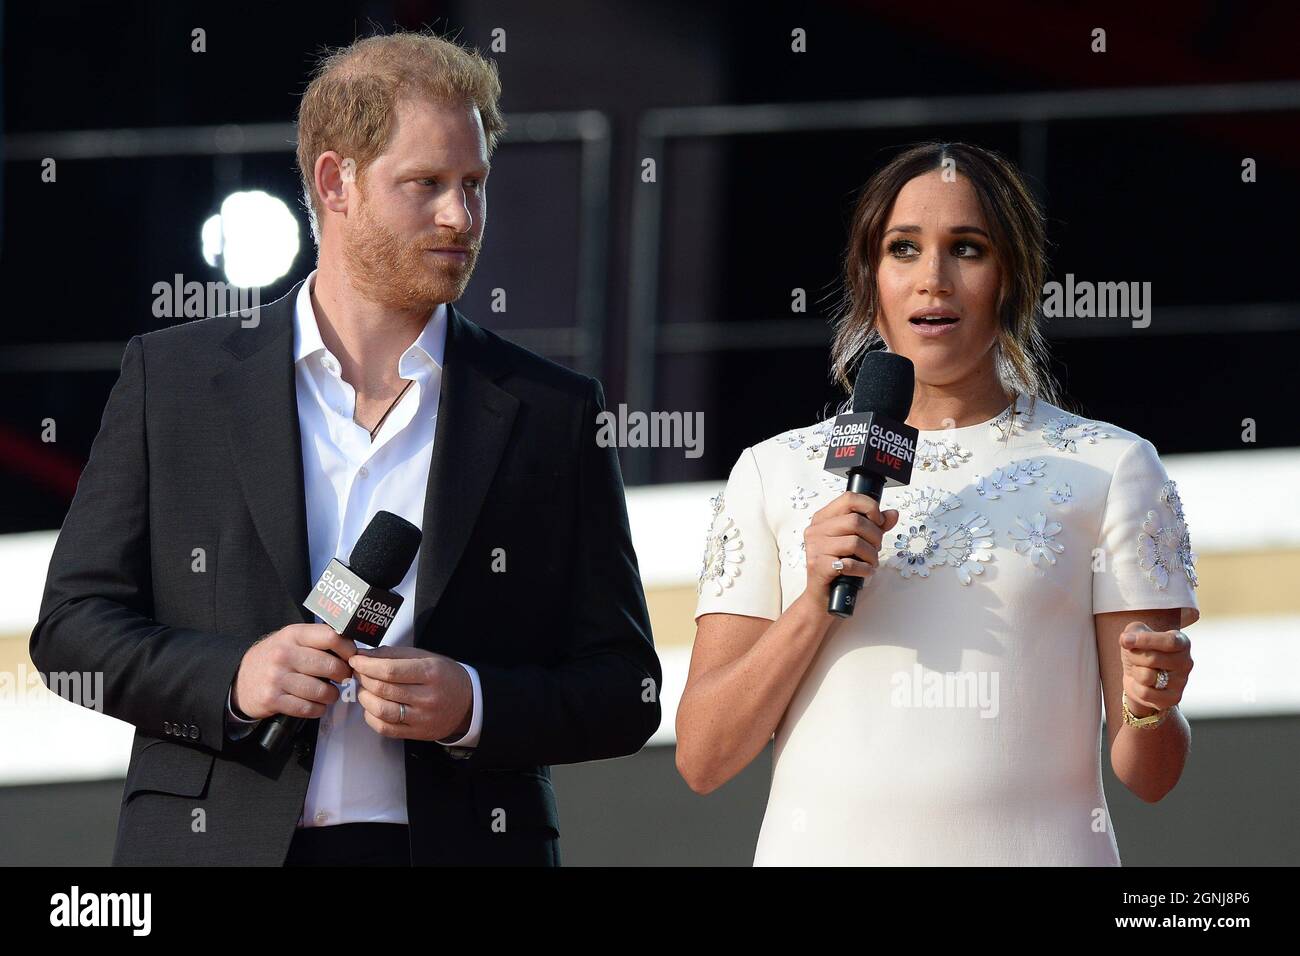 New York, NY, USA. 25th Sep, 2021. Prince Harry, Meghan Markle on stage for Global Citizen Concert 2021 NYC - Part 2, The Great Lawn in Central Park, New York, NY September 25, 2021. Credit: Kristin Callahan/Everett Collection/Alamy Live News Stock Photo